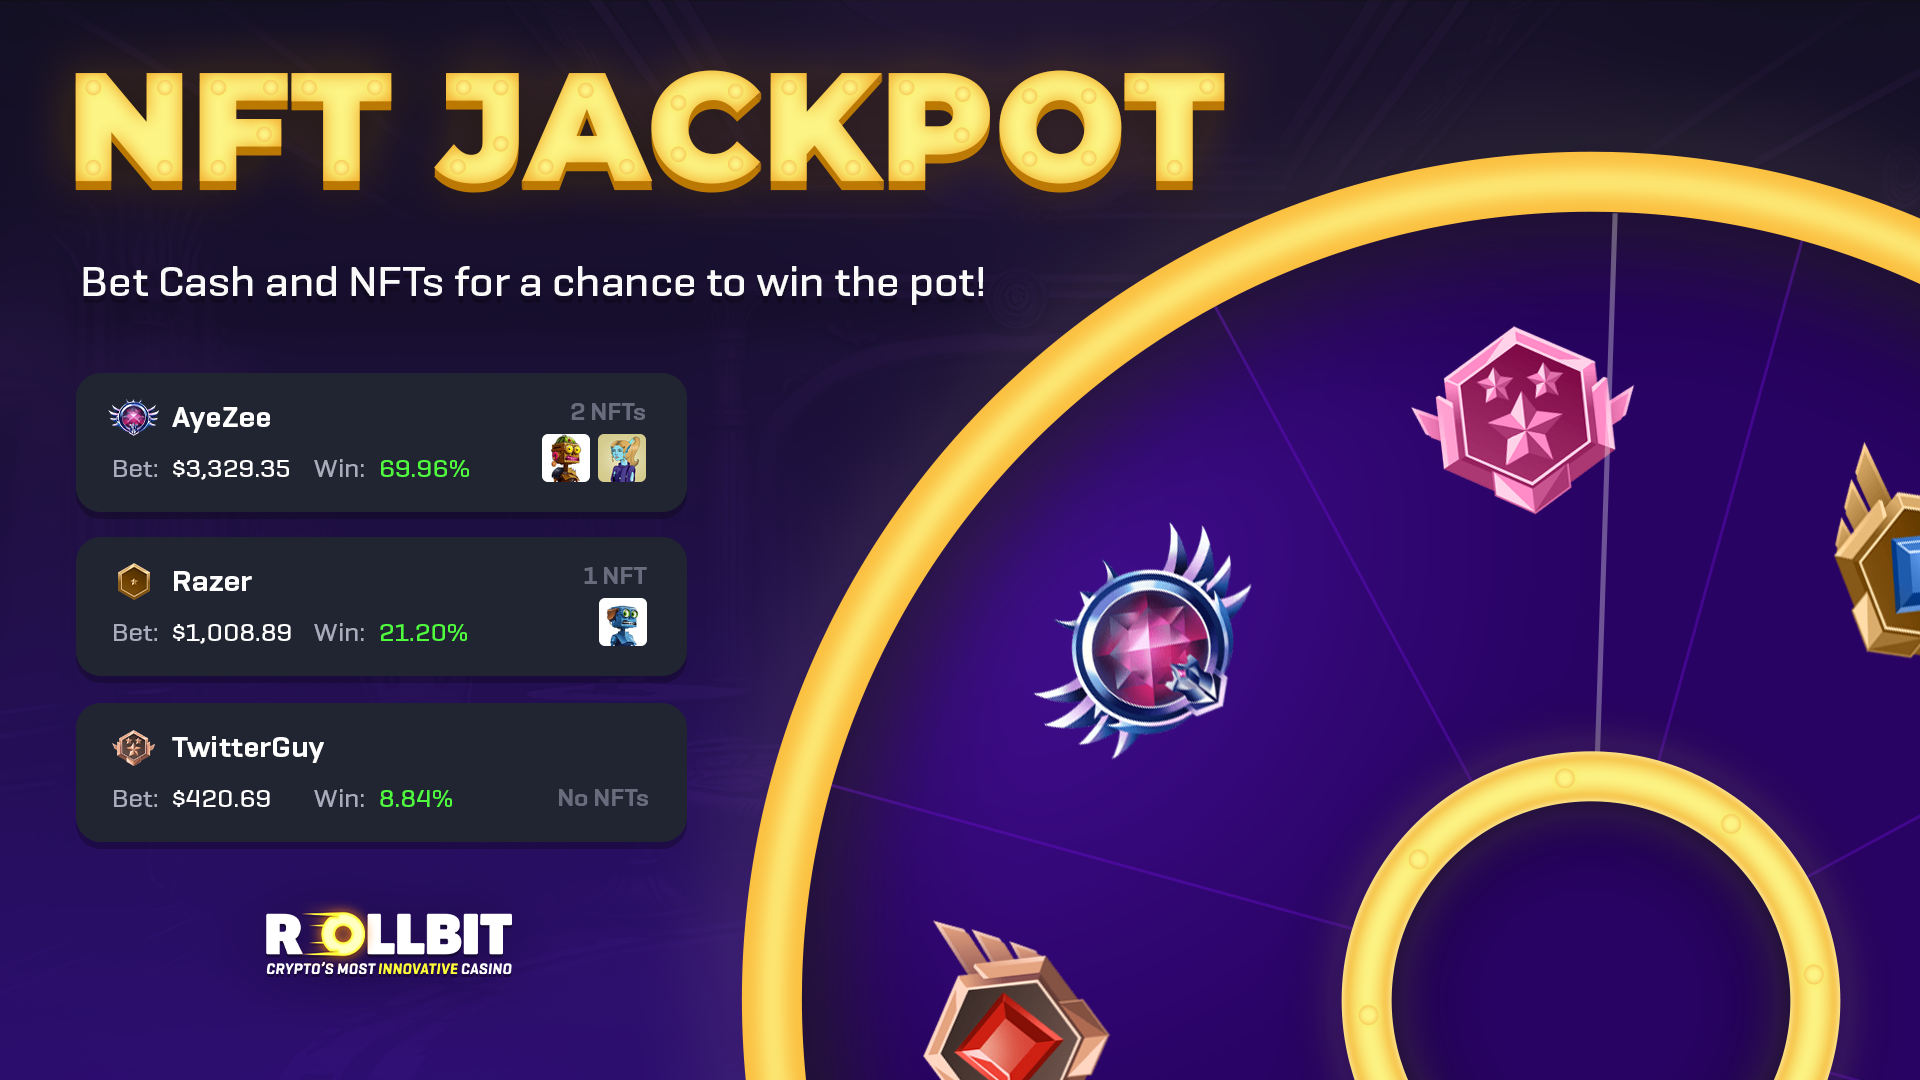 Introducing the NFT Jackpot: Bet NFTs or Cash to Win!